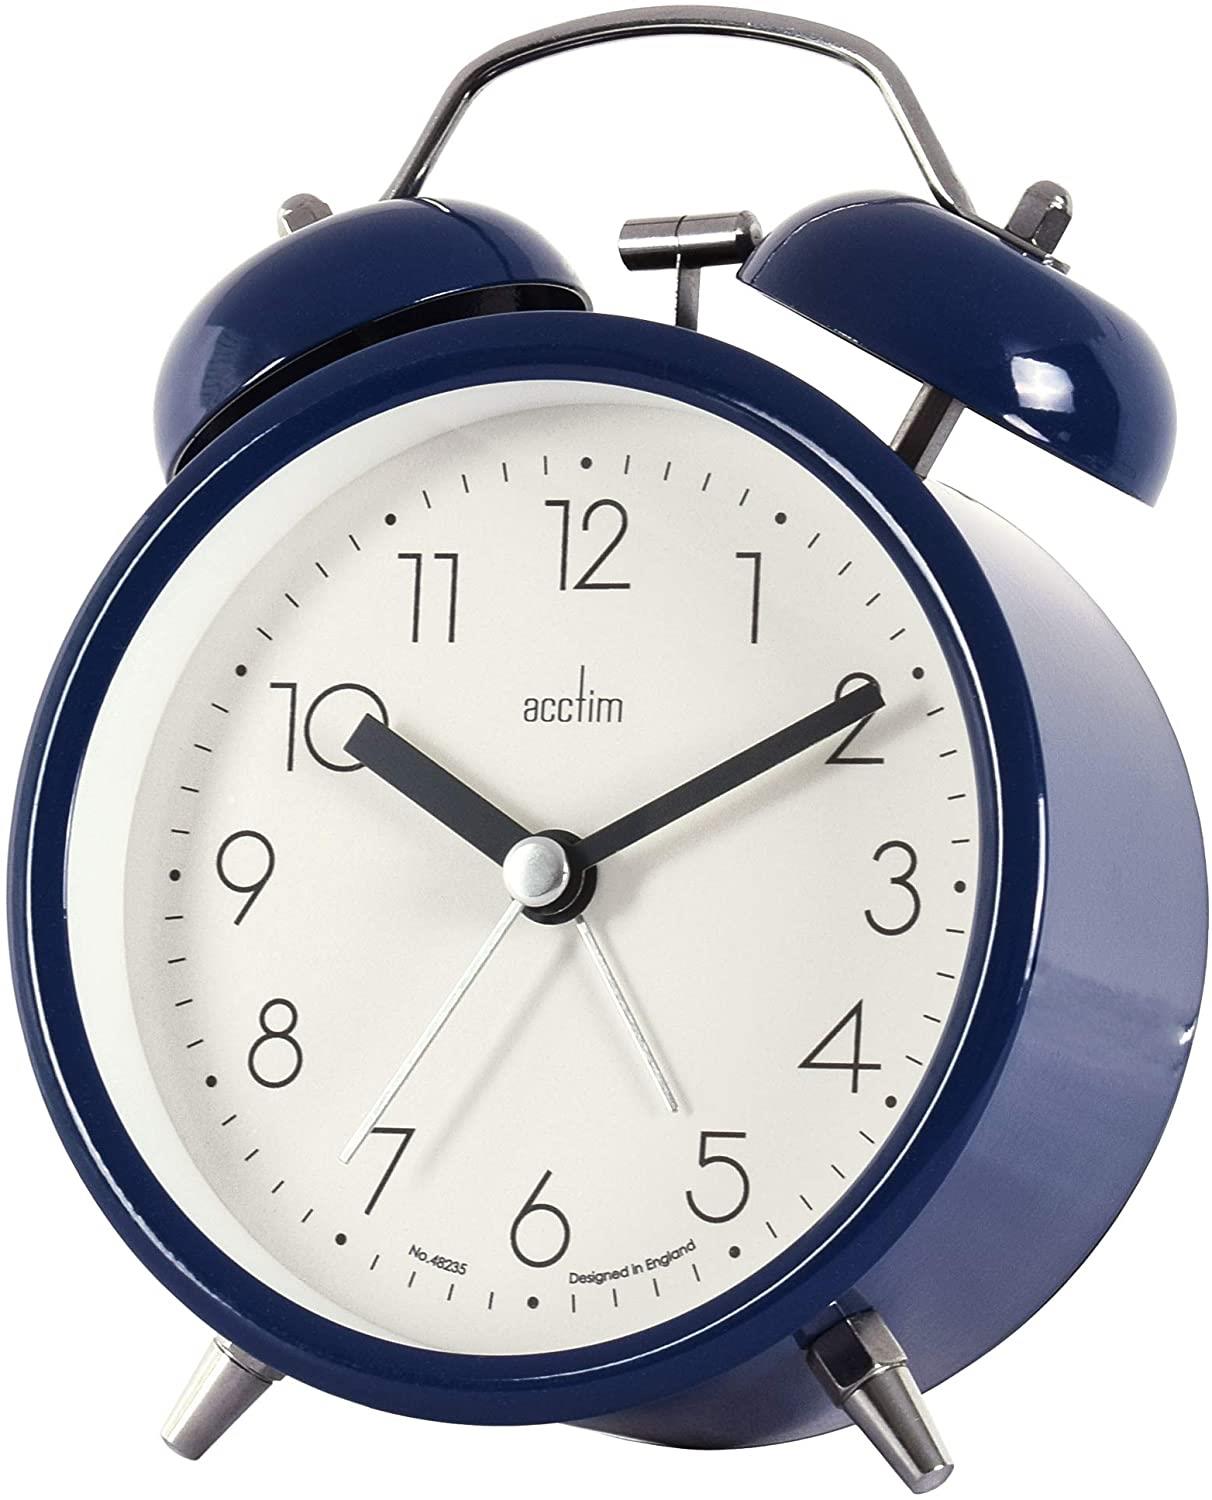 Acctim Askel Double Bell Alarm Clock in Midnight Blue 15949